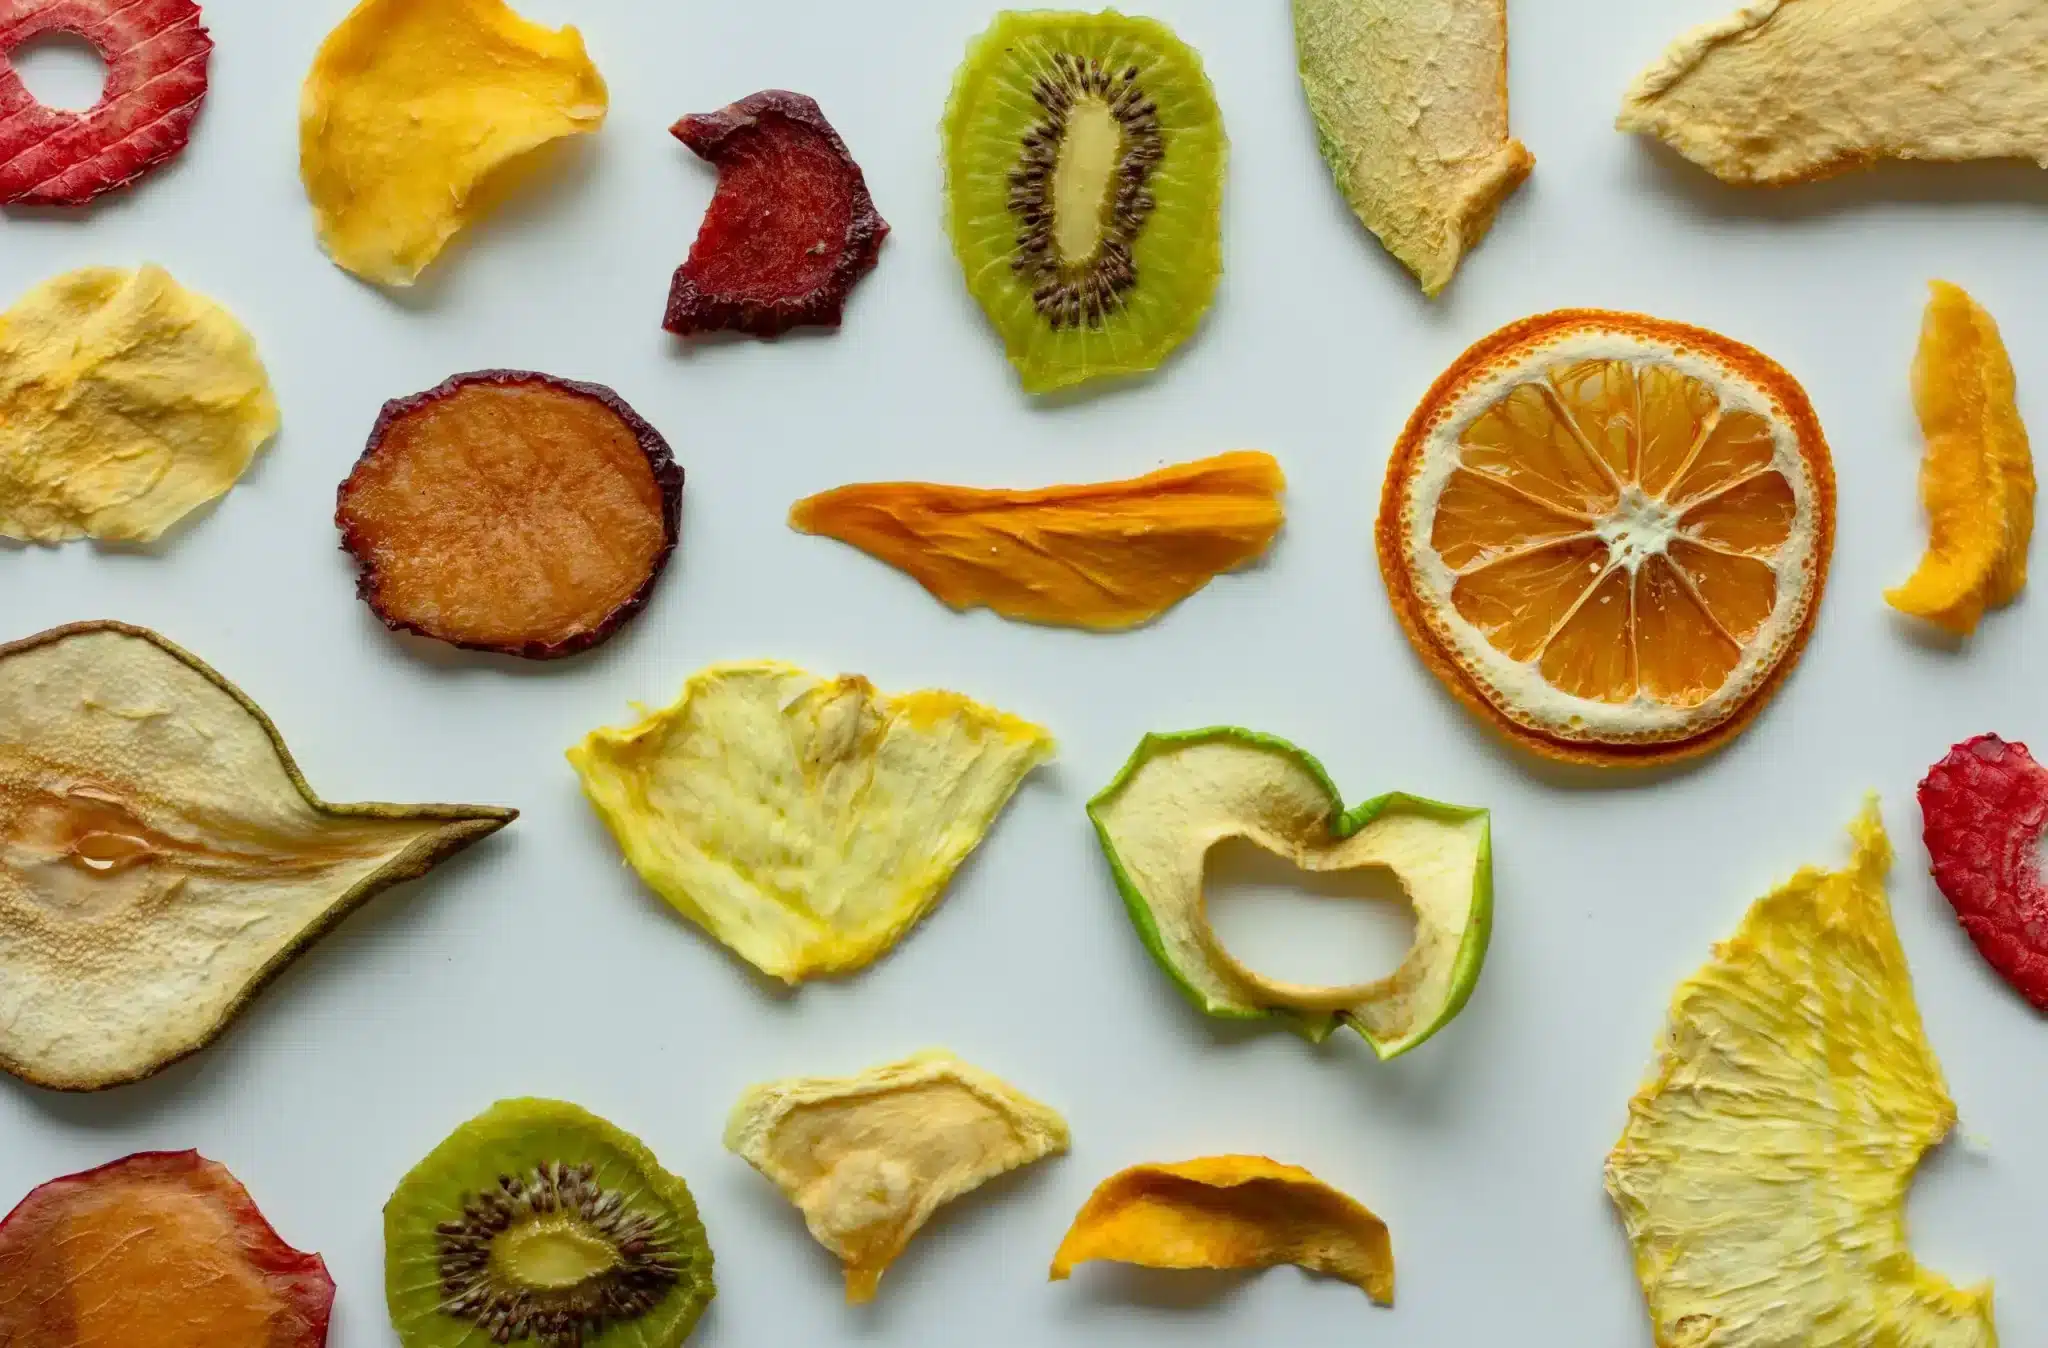 An assortment of vibrant dried fruit slices spread out against a white background. The collection includes strawberries, apples, oranges, kiwis, and pears among others, showcasing a variety of shapes and rich colors, with one piece cut into a heart shape.